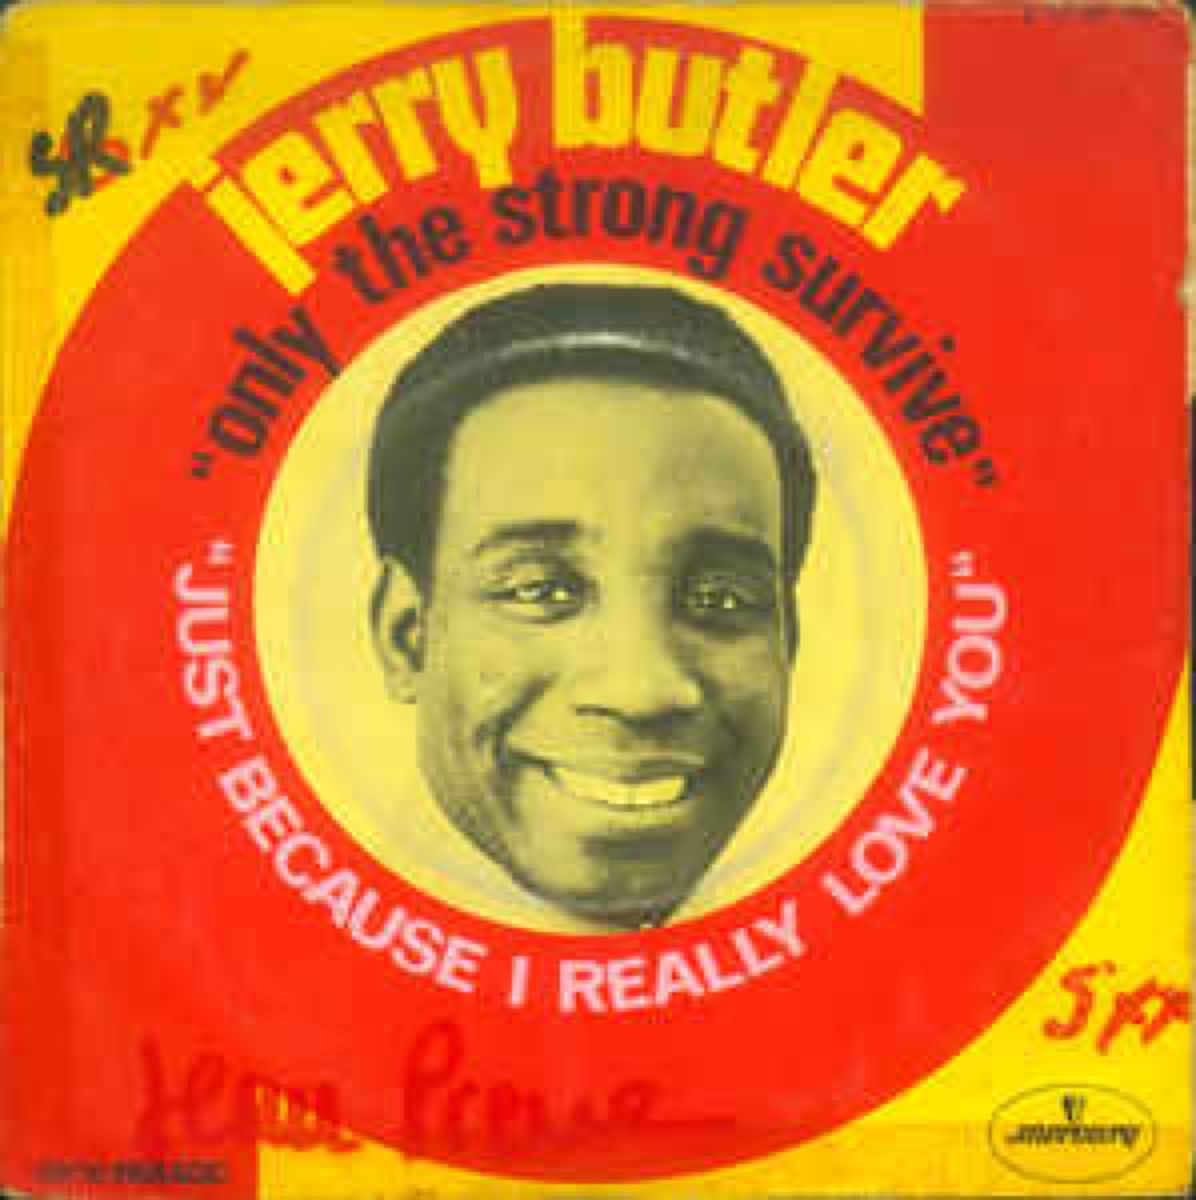 only the strong survive, jerry butler single cover, 1969 songs